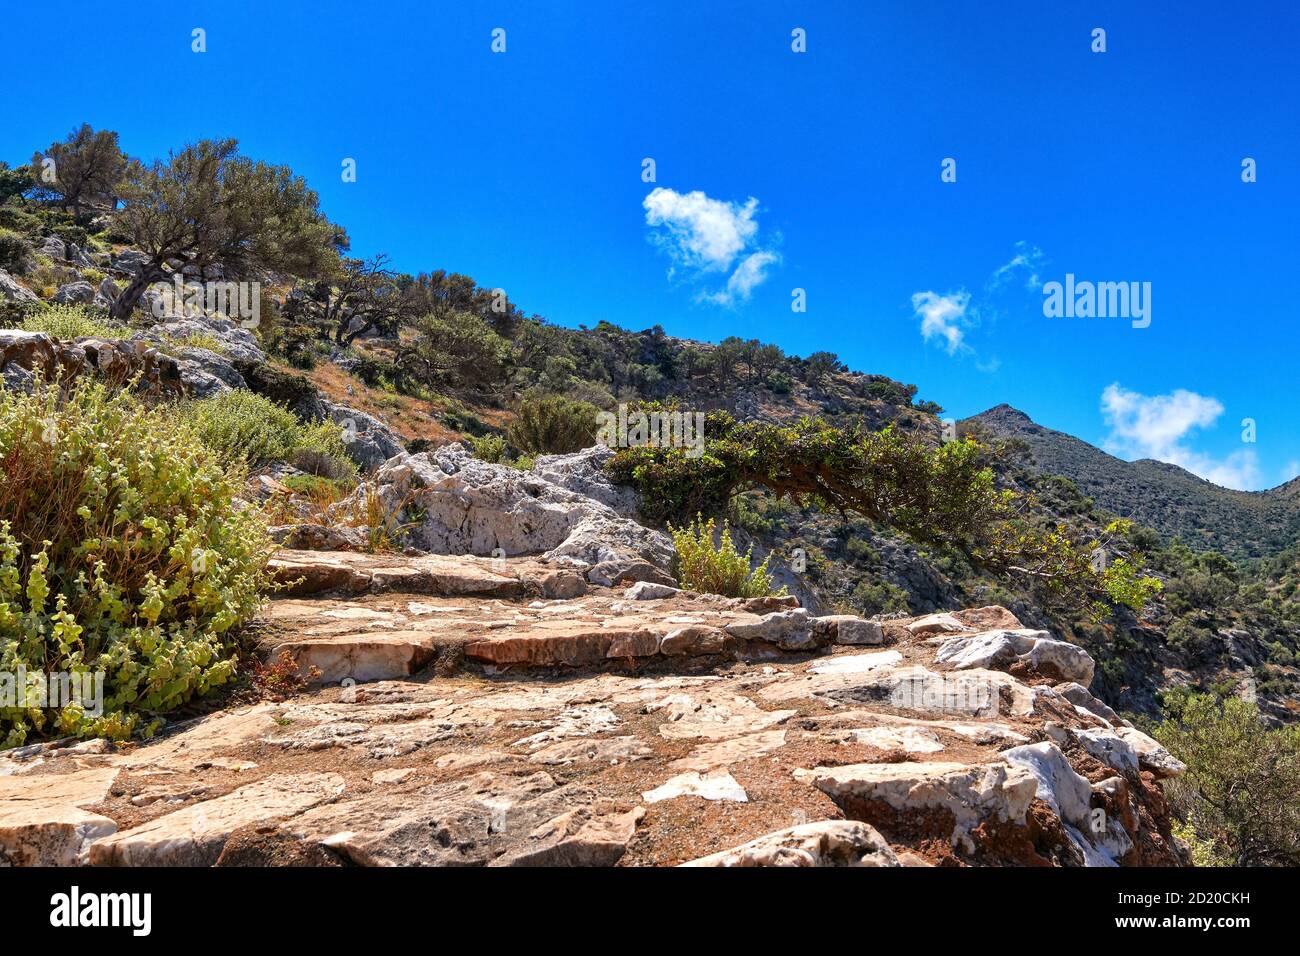 Greek or Cretan view, hill, mountain, spring, bushes, olive trees, rocky path, paved stairs. Clear blue sky, beautiful clouds. Akrotiri, Crete, Greece Stock Photo